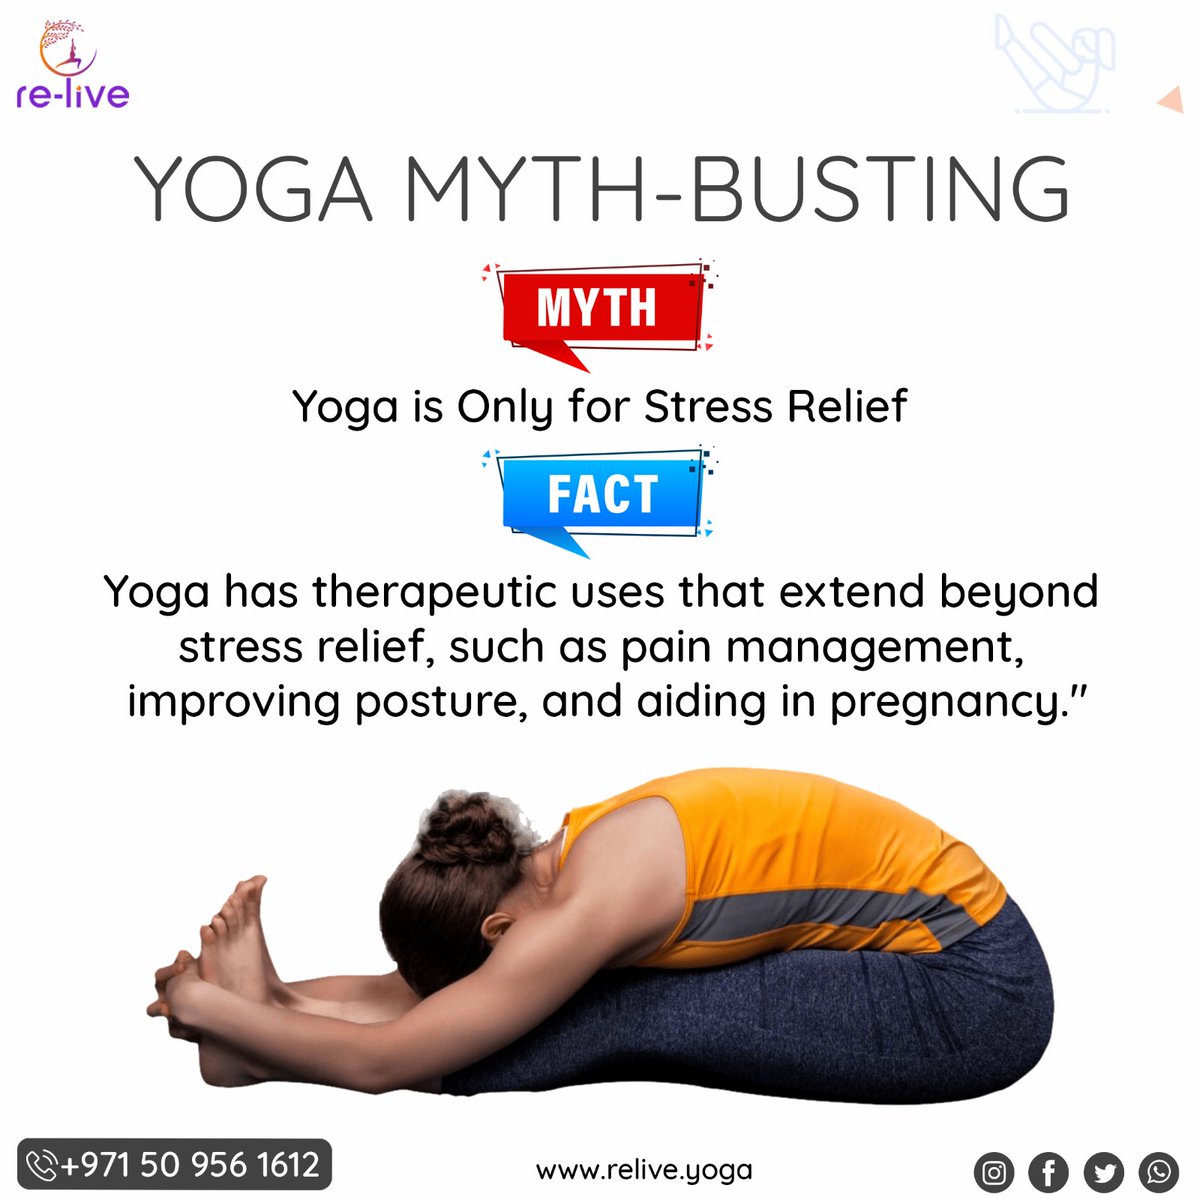 Yoga Math Busting

Yoga is Only for Stress Relief

Check Out Below to Learn More: +971 55 535 2235

.
.
.

#yoga #yogamath #learningyoga #learntoyoga #learntoteachyoga #learningsahajayoga #yogalearn #learnaboutyoga #yogatolearn #learntoloveyoga #yogafamily #yogajournal #dubai